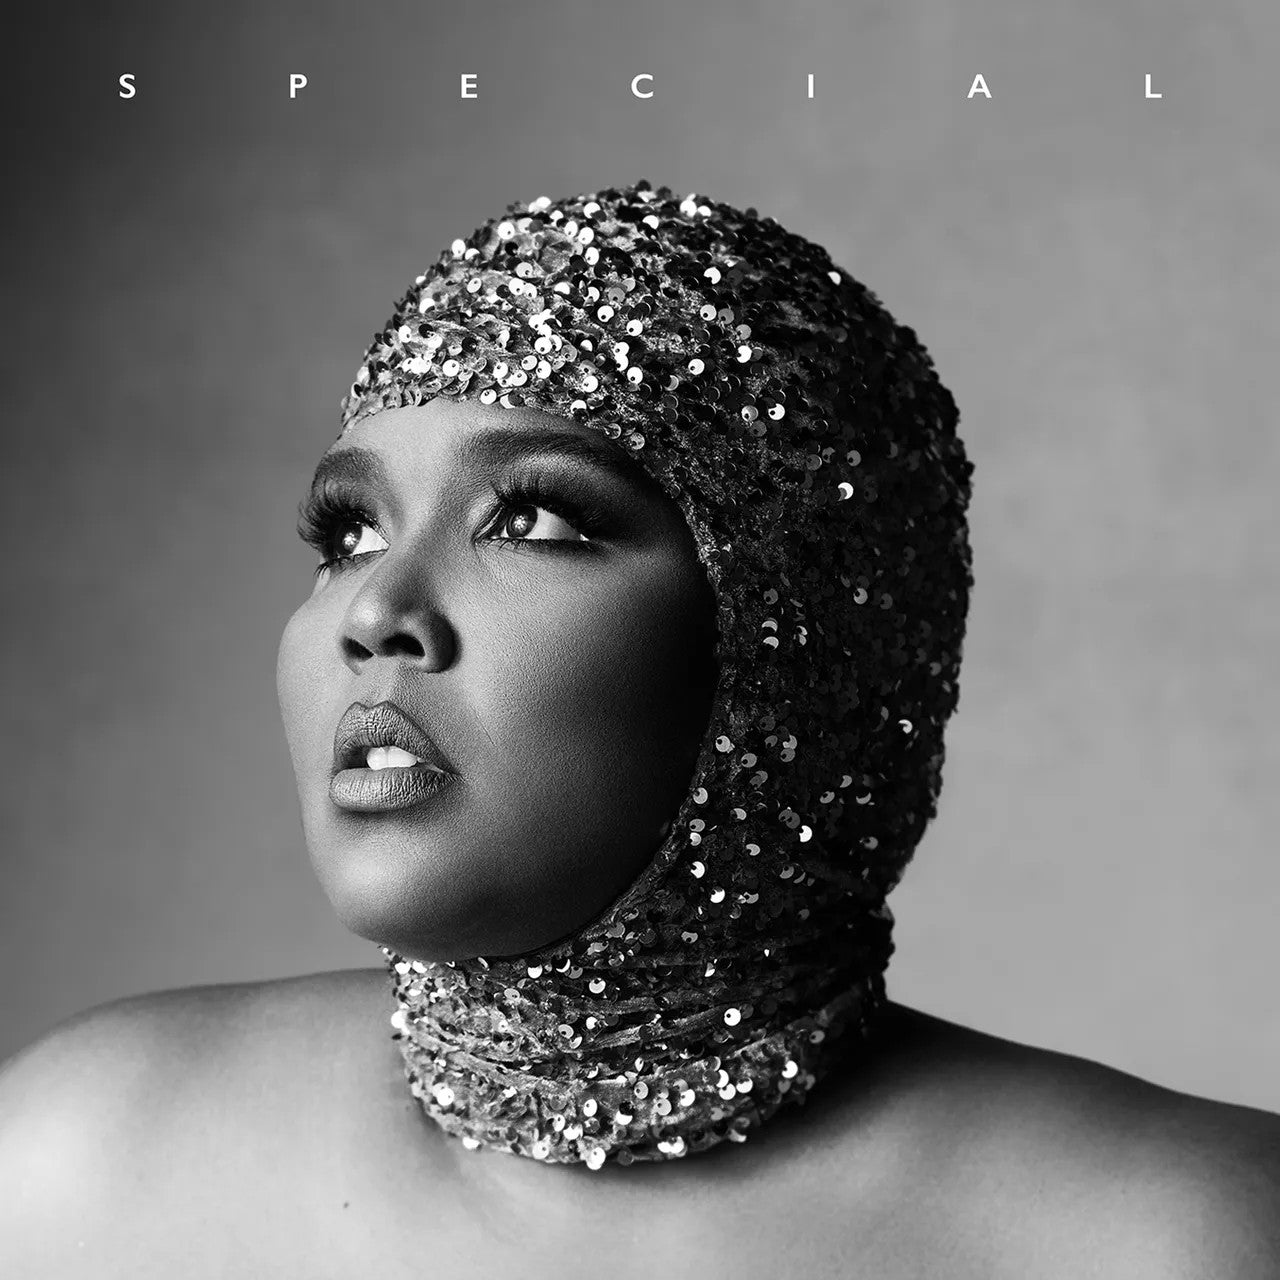 Lizzo: Special - Gold Vinyl LP - Exclusive Limited Edition Gold Vinyl